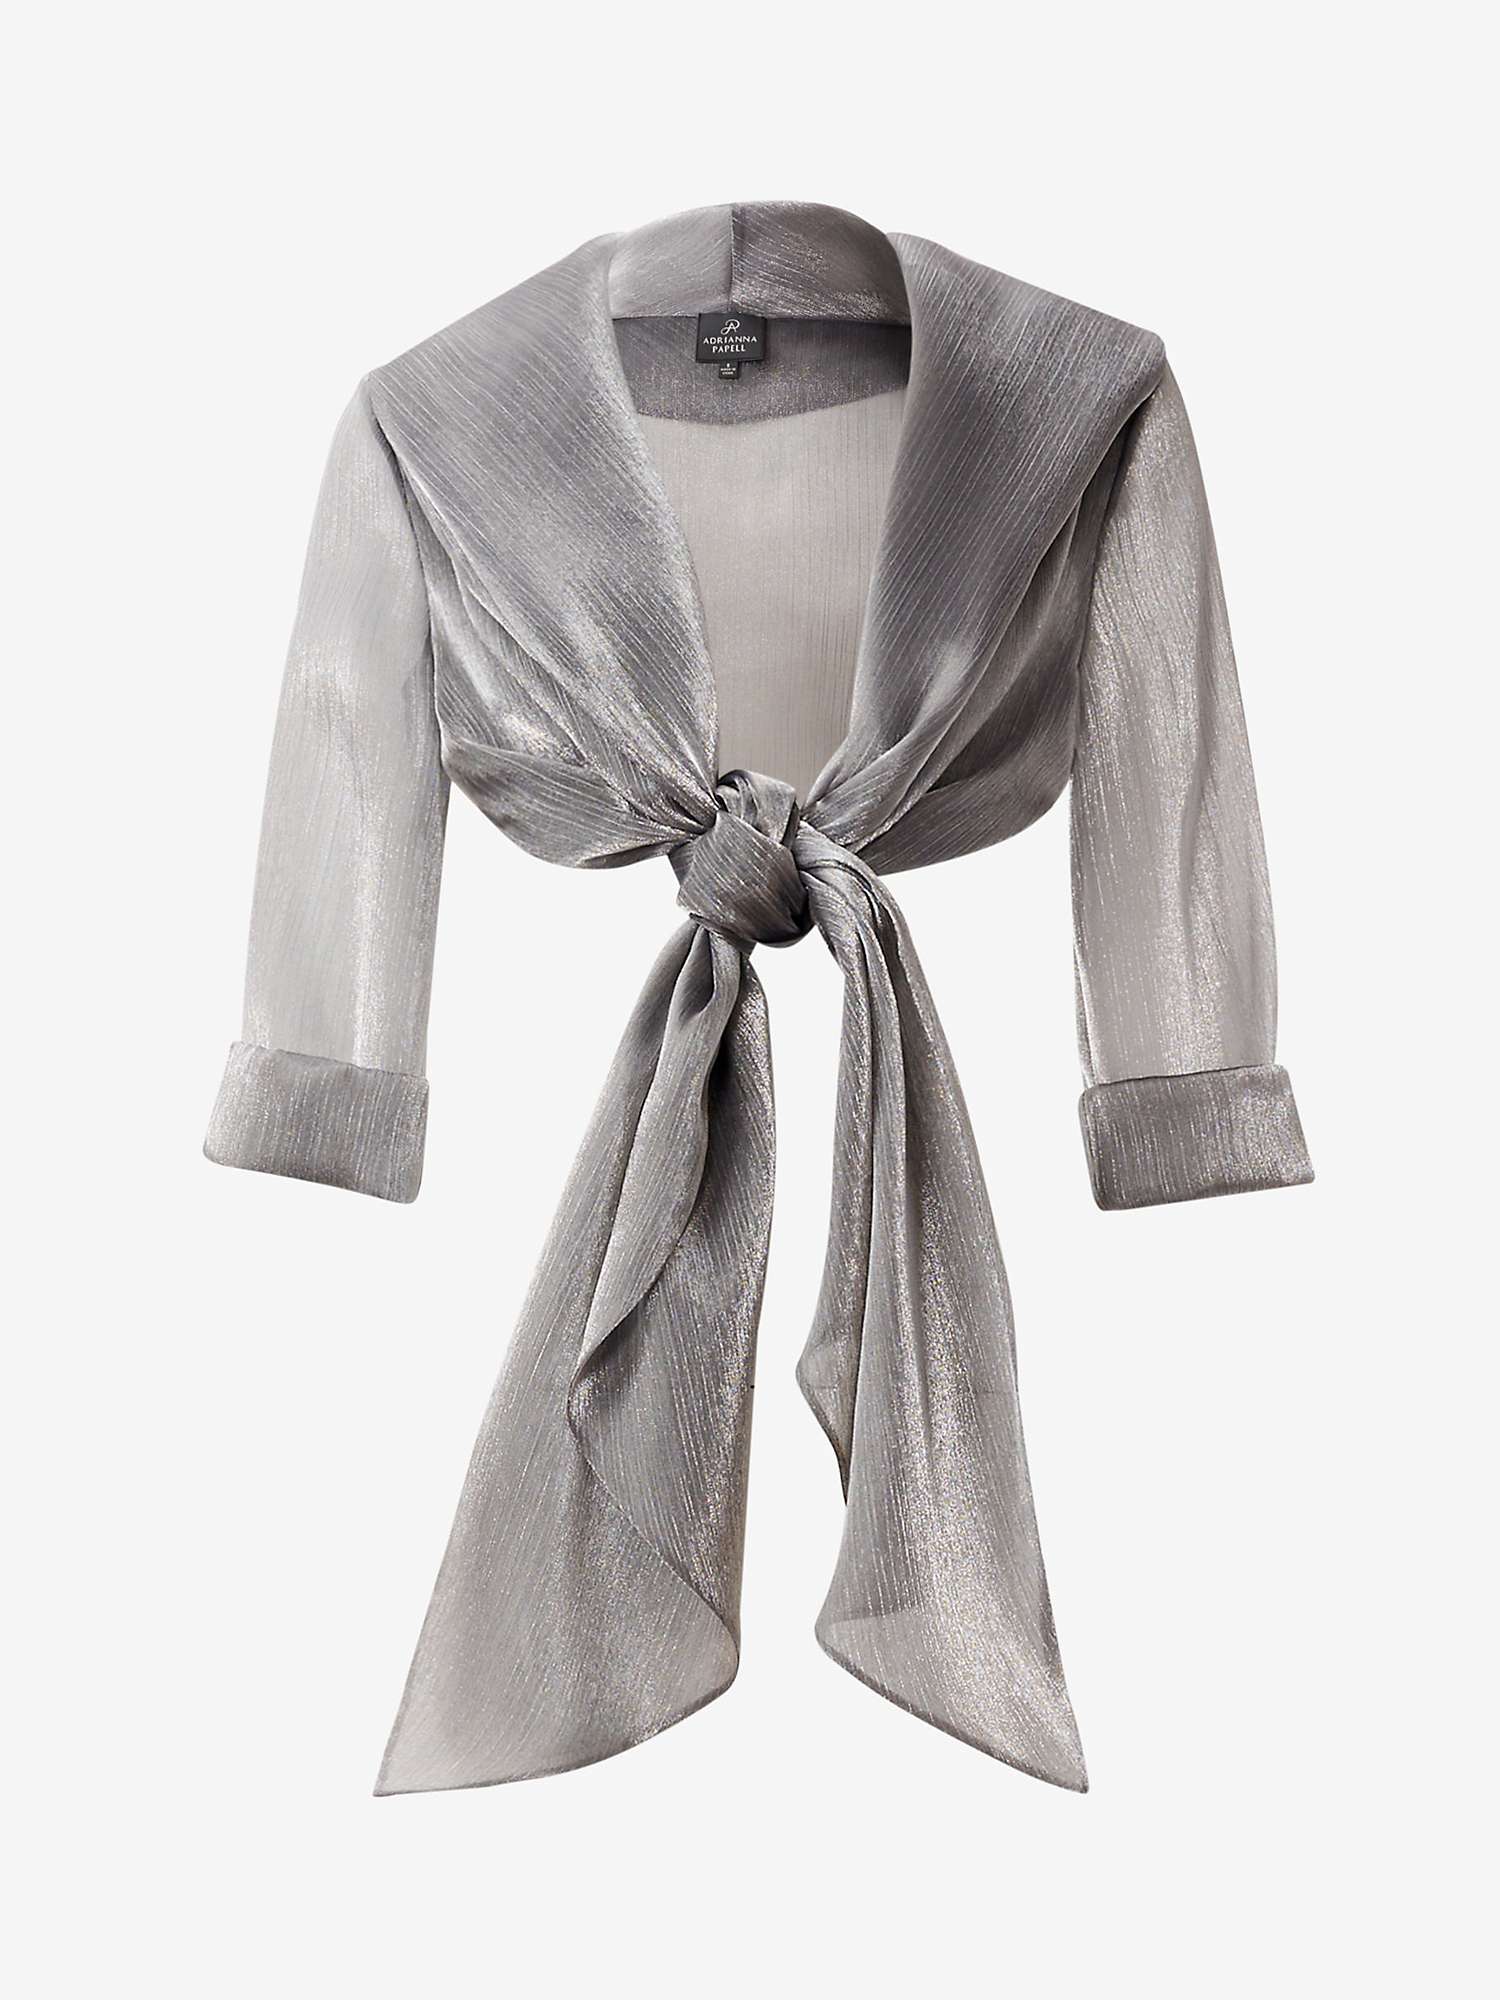 Buy Adrianna Papell Metallic Crinkle Organza Wrap, Silver Online at johnlewis.com